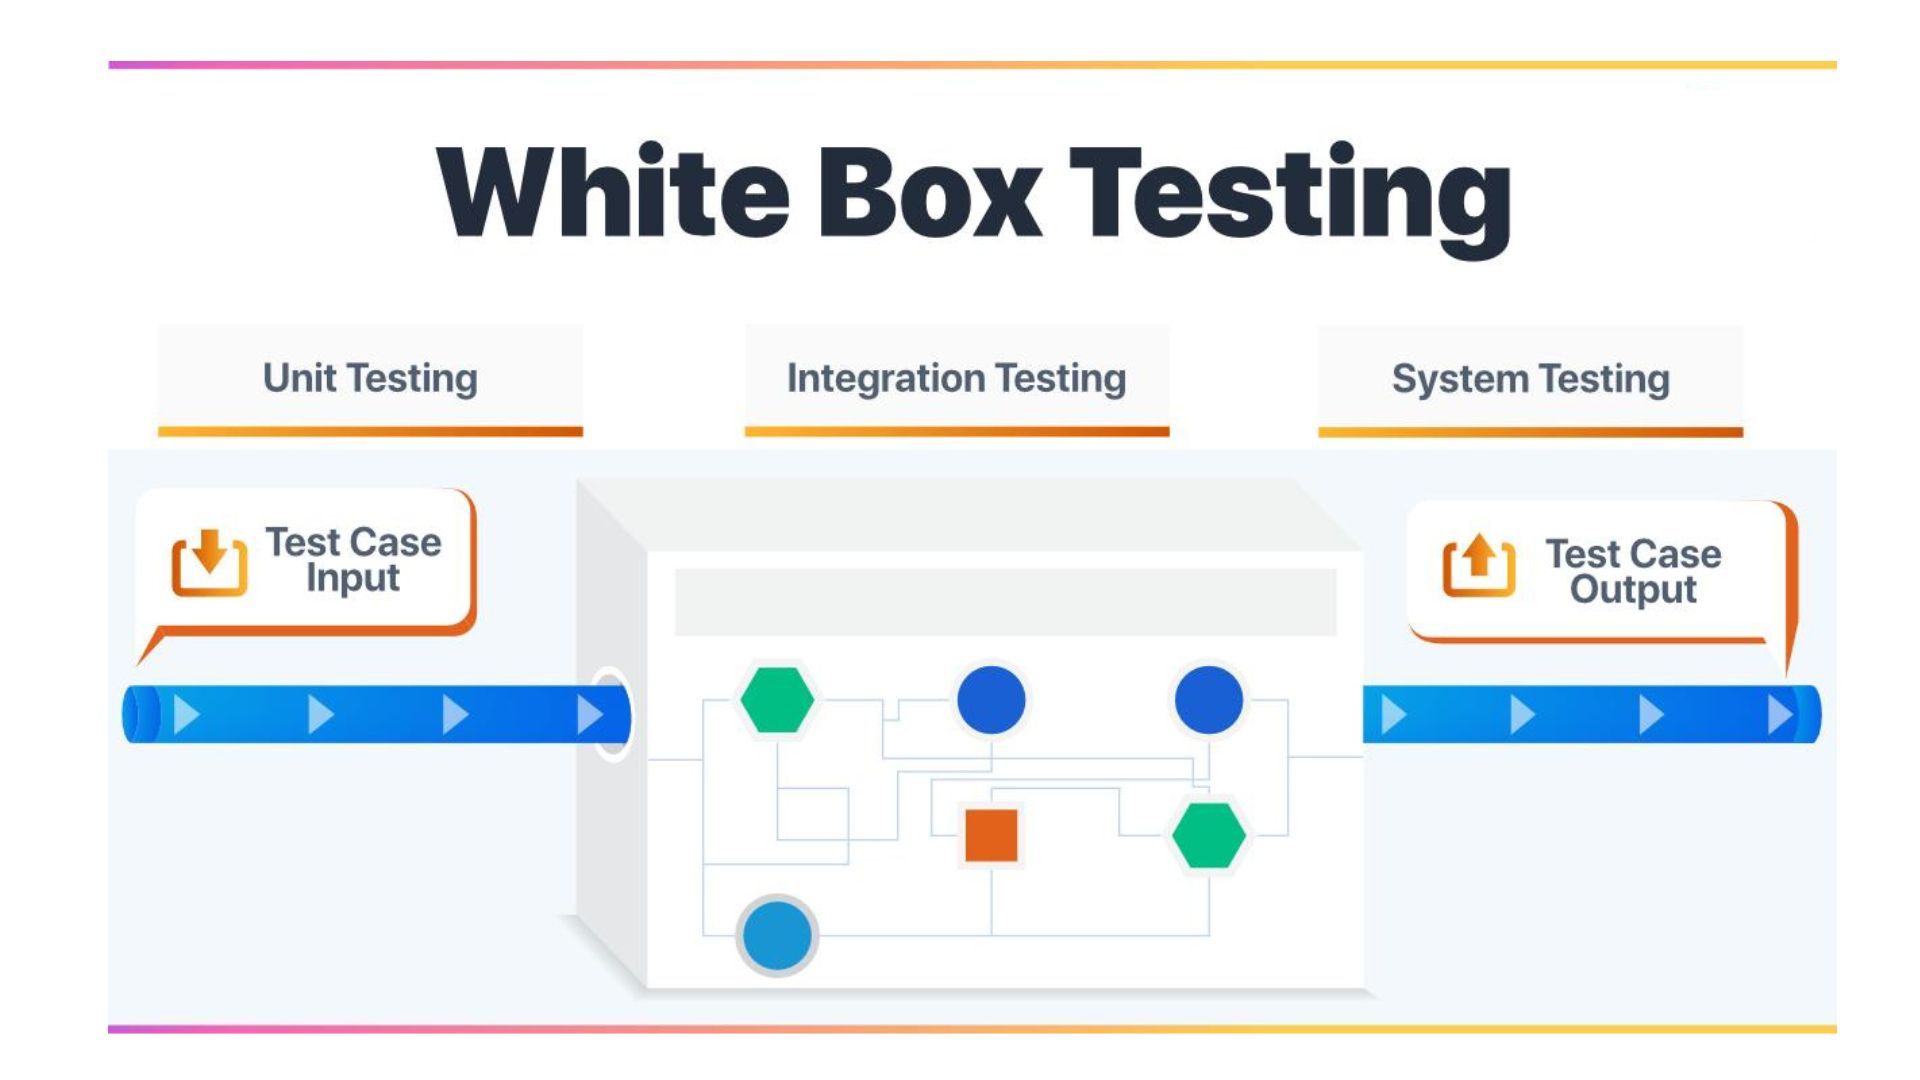 A Quick Guide to White Box Testing